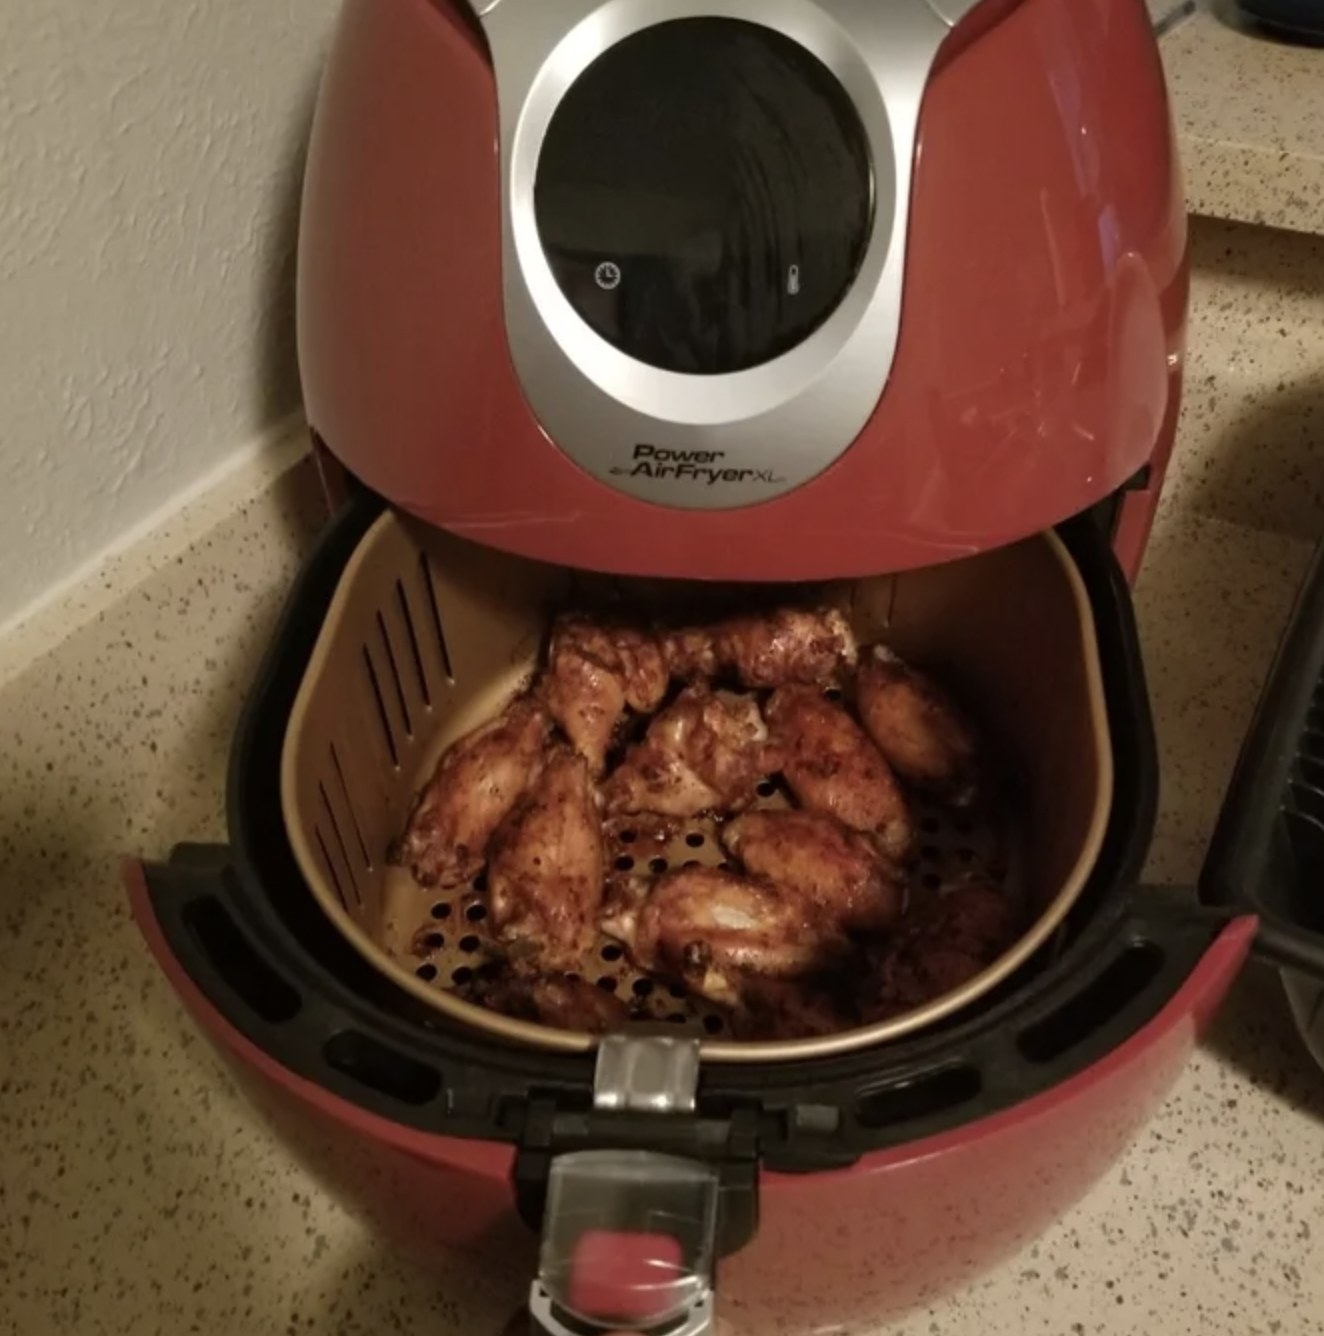 Reviewer&#x27;s photo of the red air fryer pen to show chicken wings in the basket